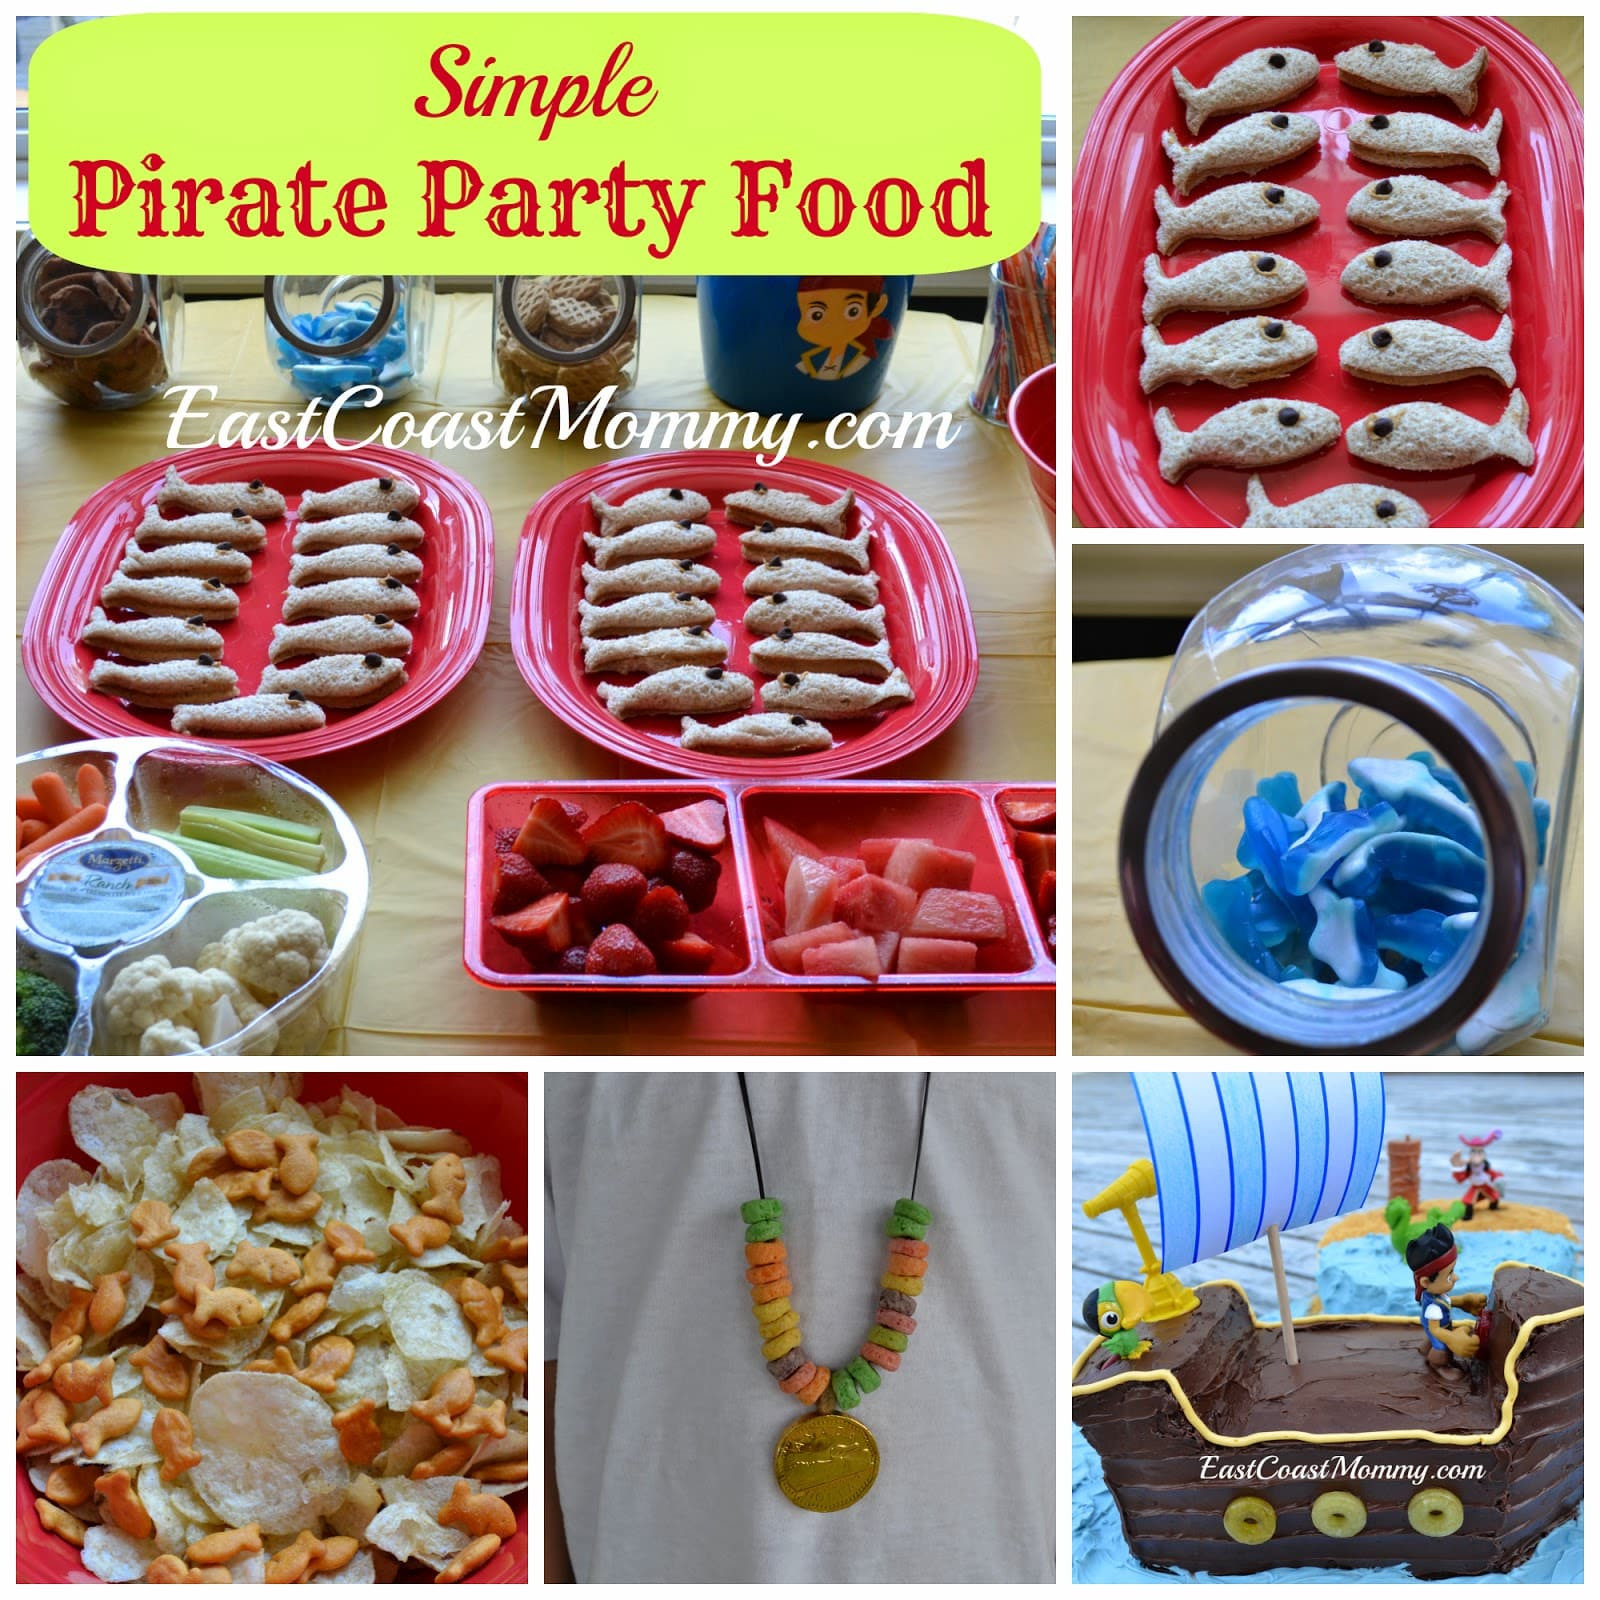 Pirate Party Food Ideas
 Everything you need to host a perfect Pirate Party